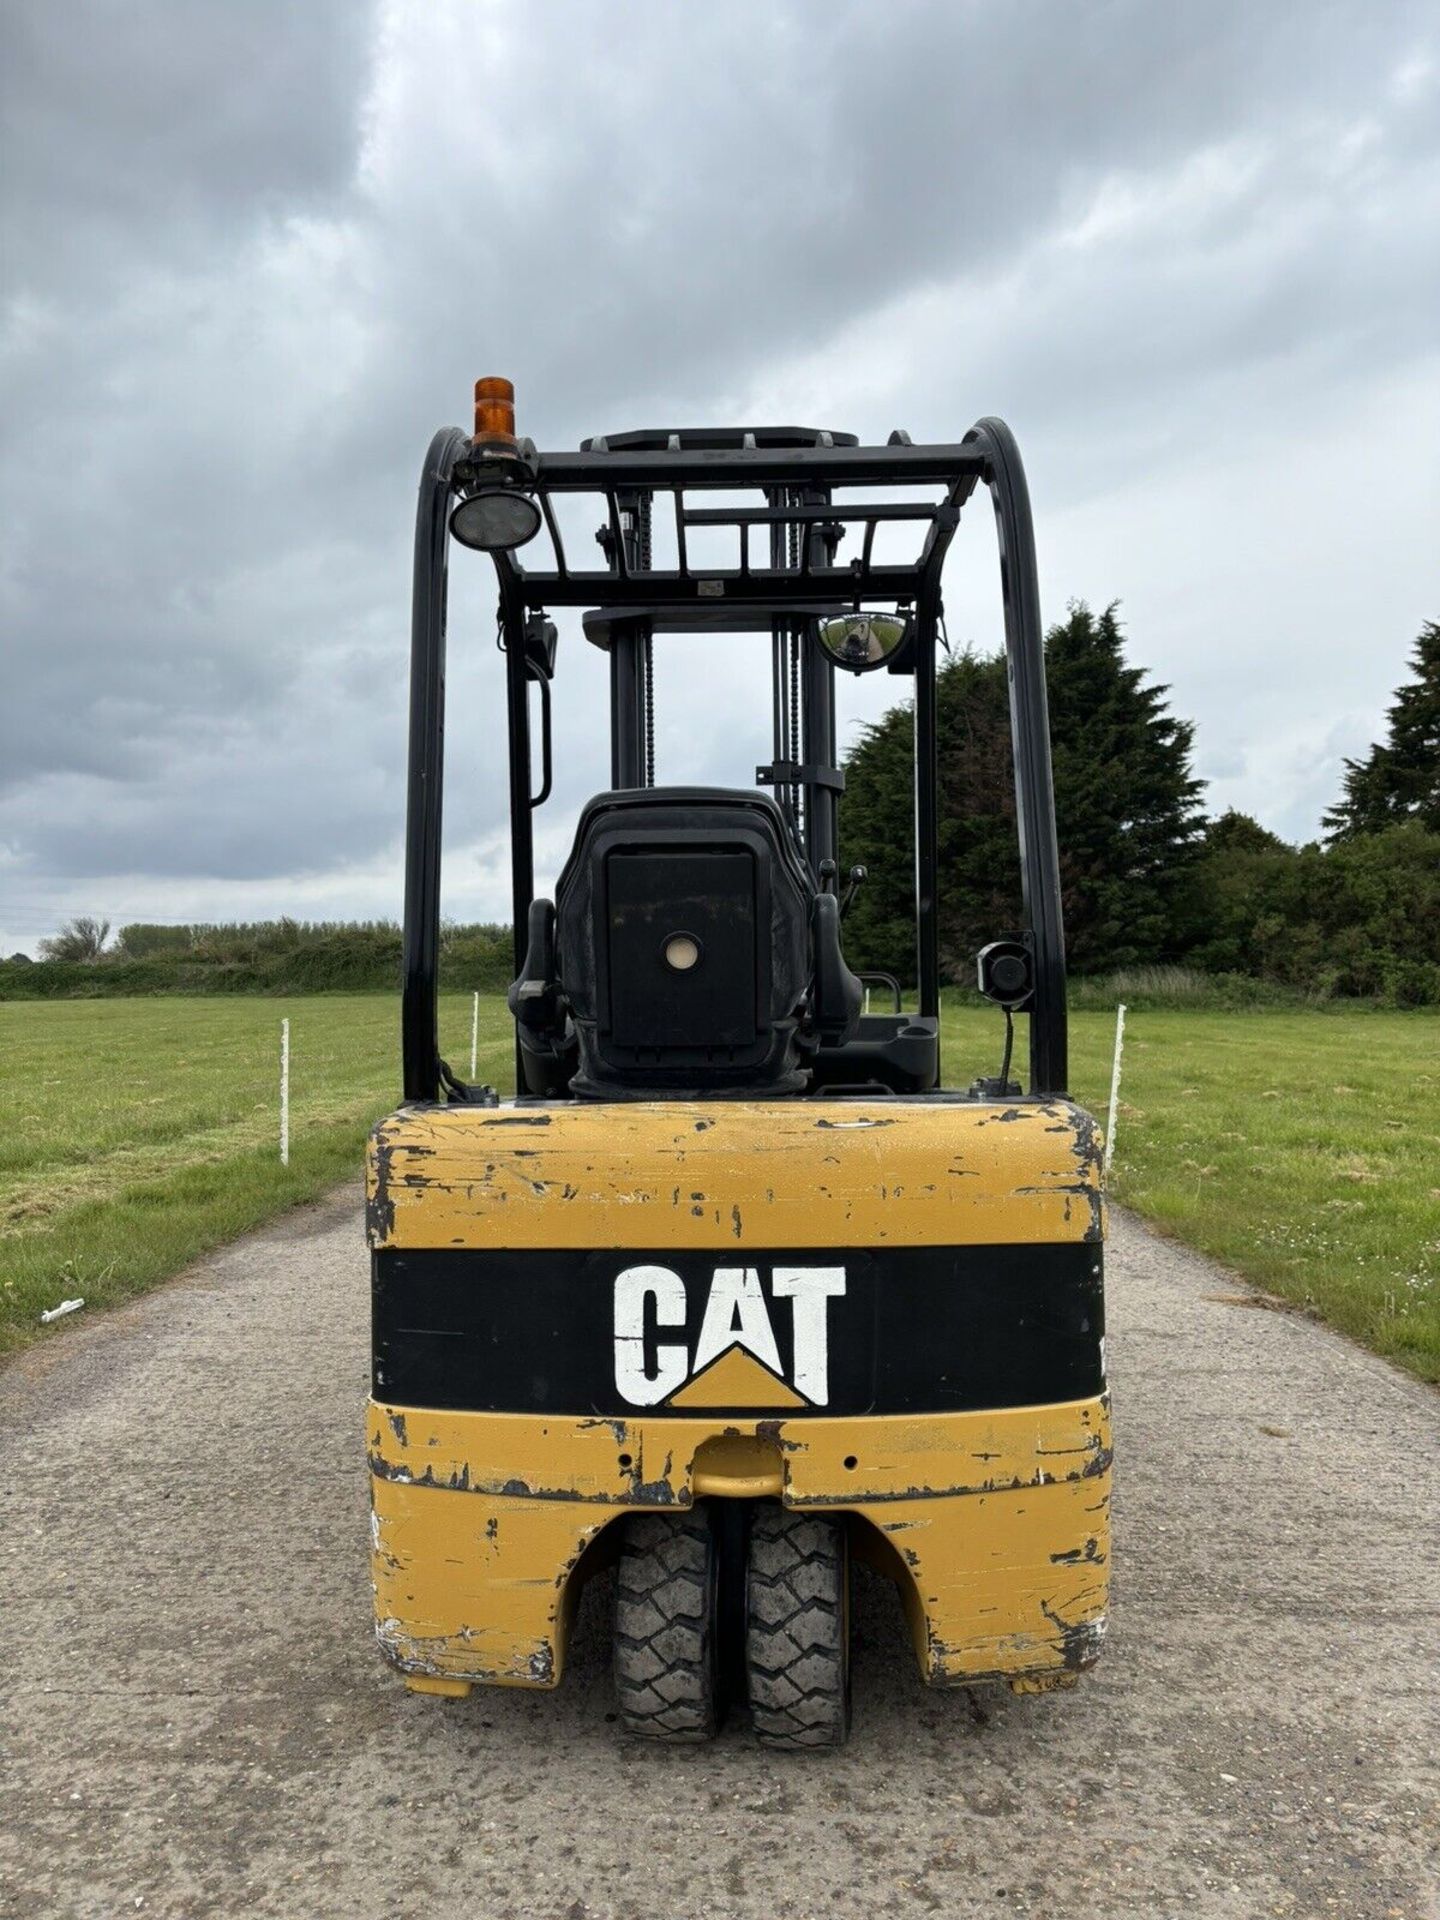 2011, CATERPILLAR - Electric Forklift Truck - Image 2 of 8